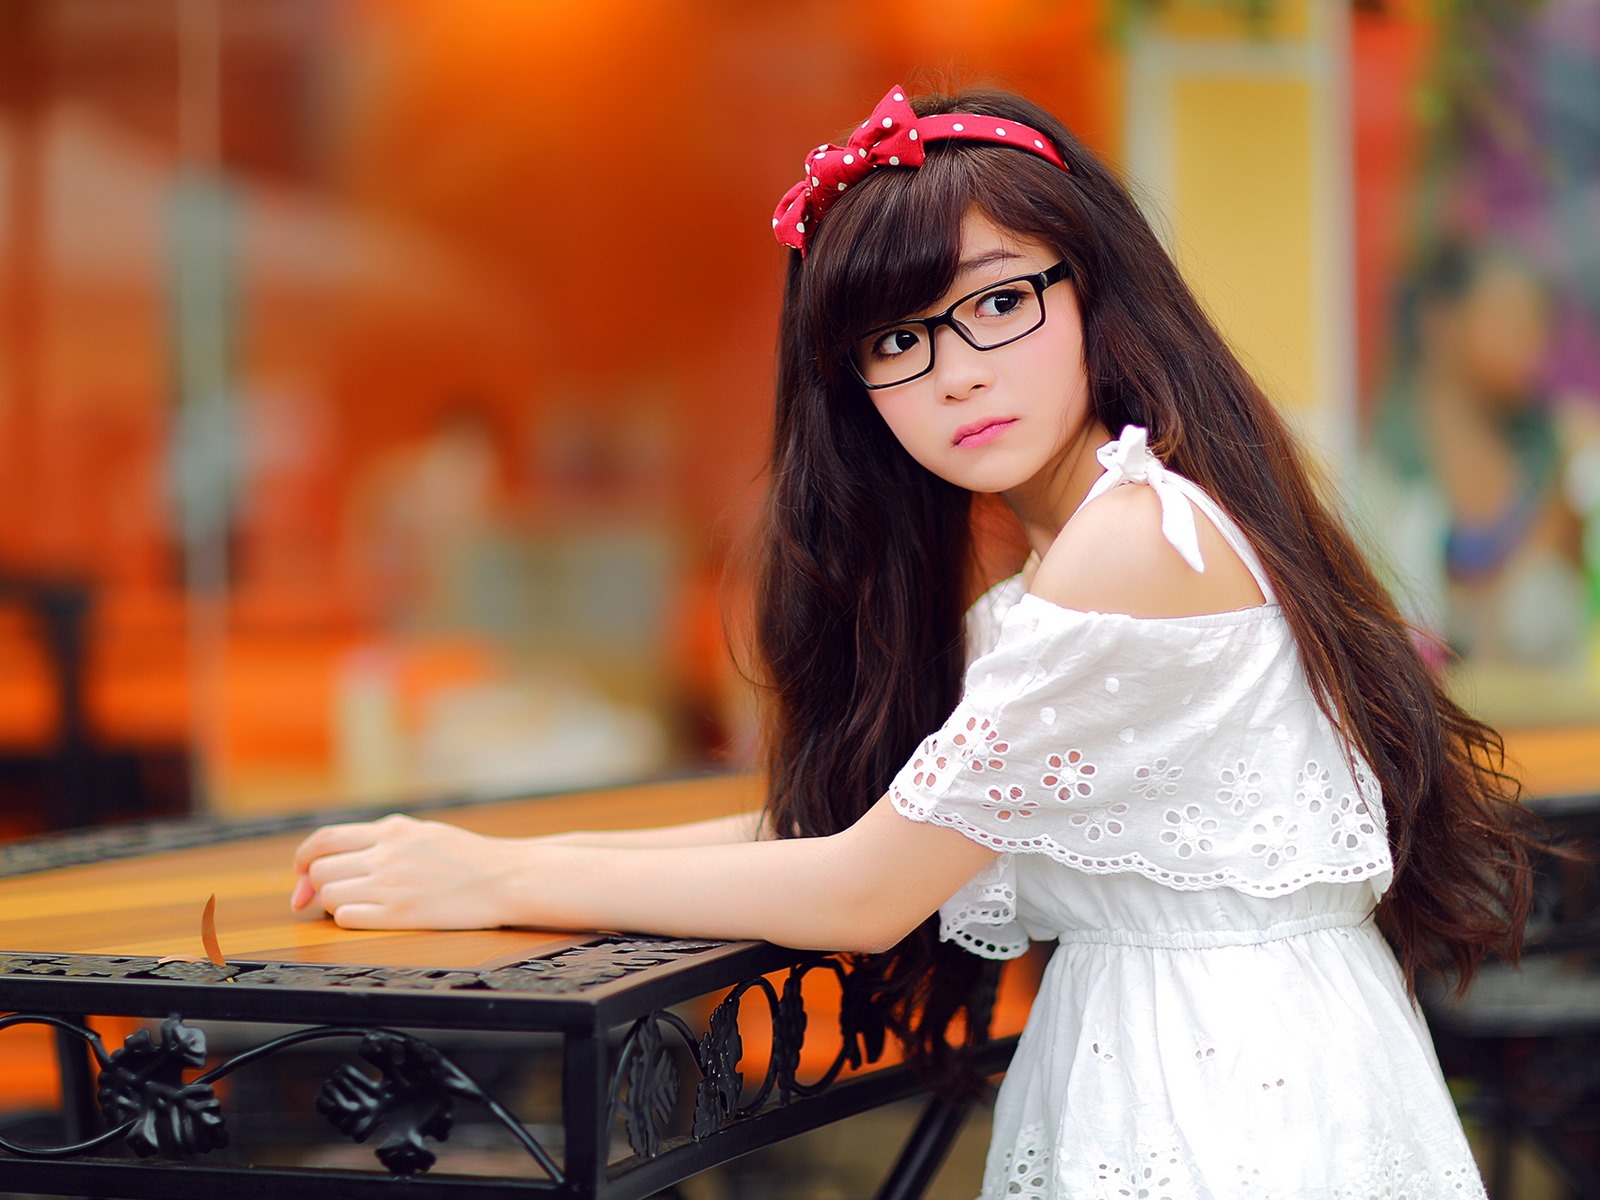 Pure and lovely young Asian girl HD wallpapers collection (1) #17 - 1600x1200